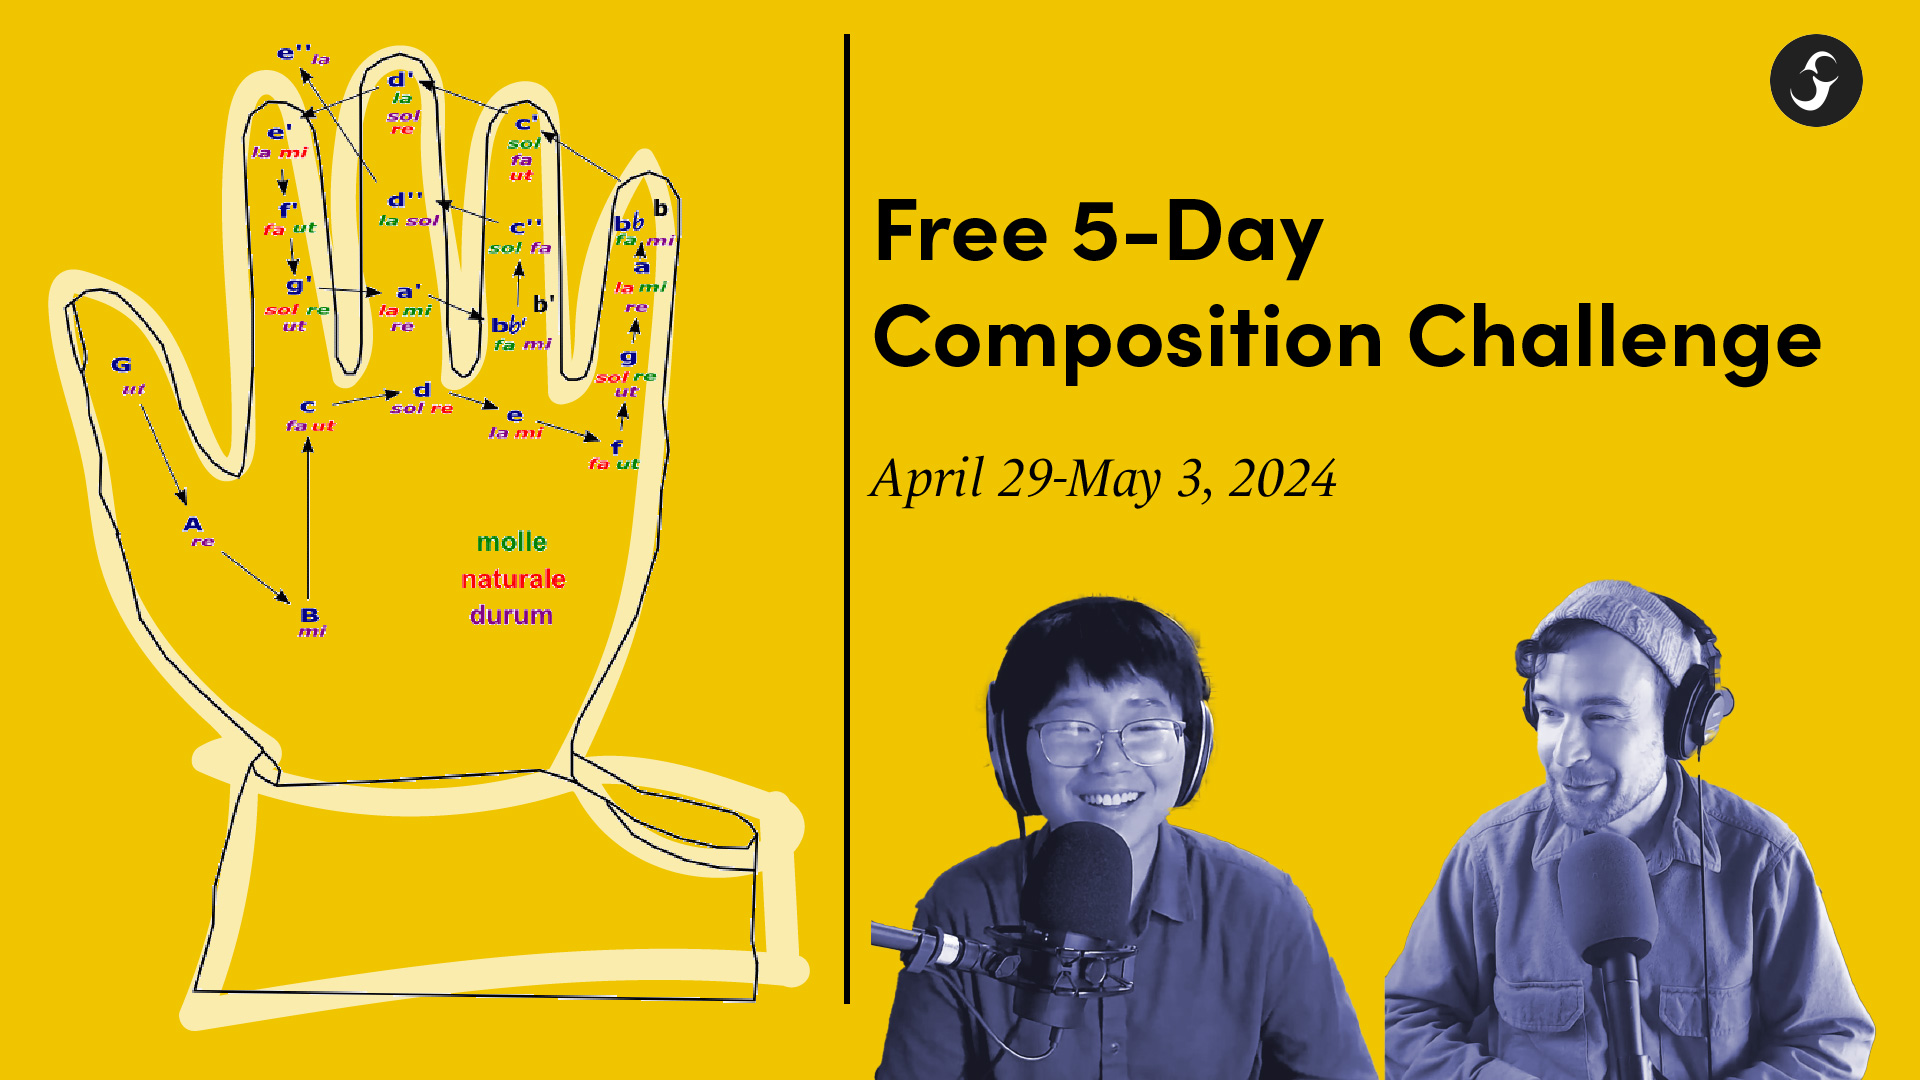 5-Day Composition Challenge, April 29-May 3, 2024